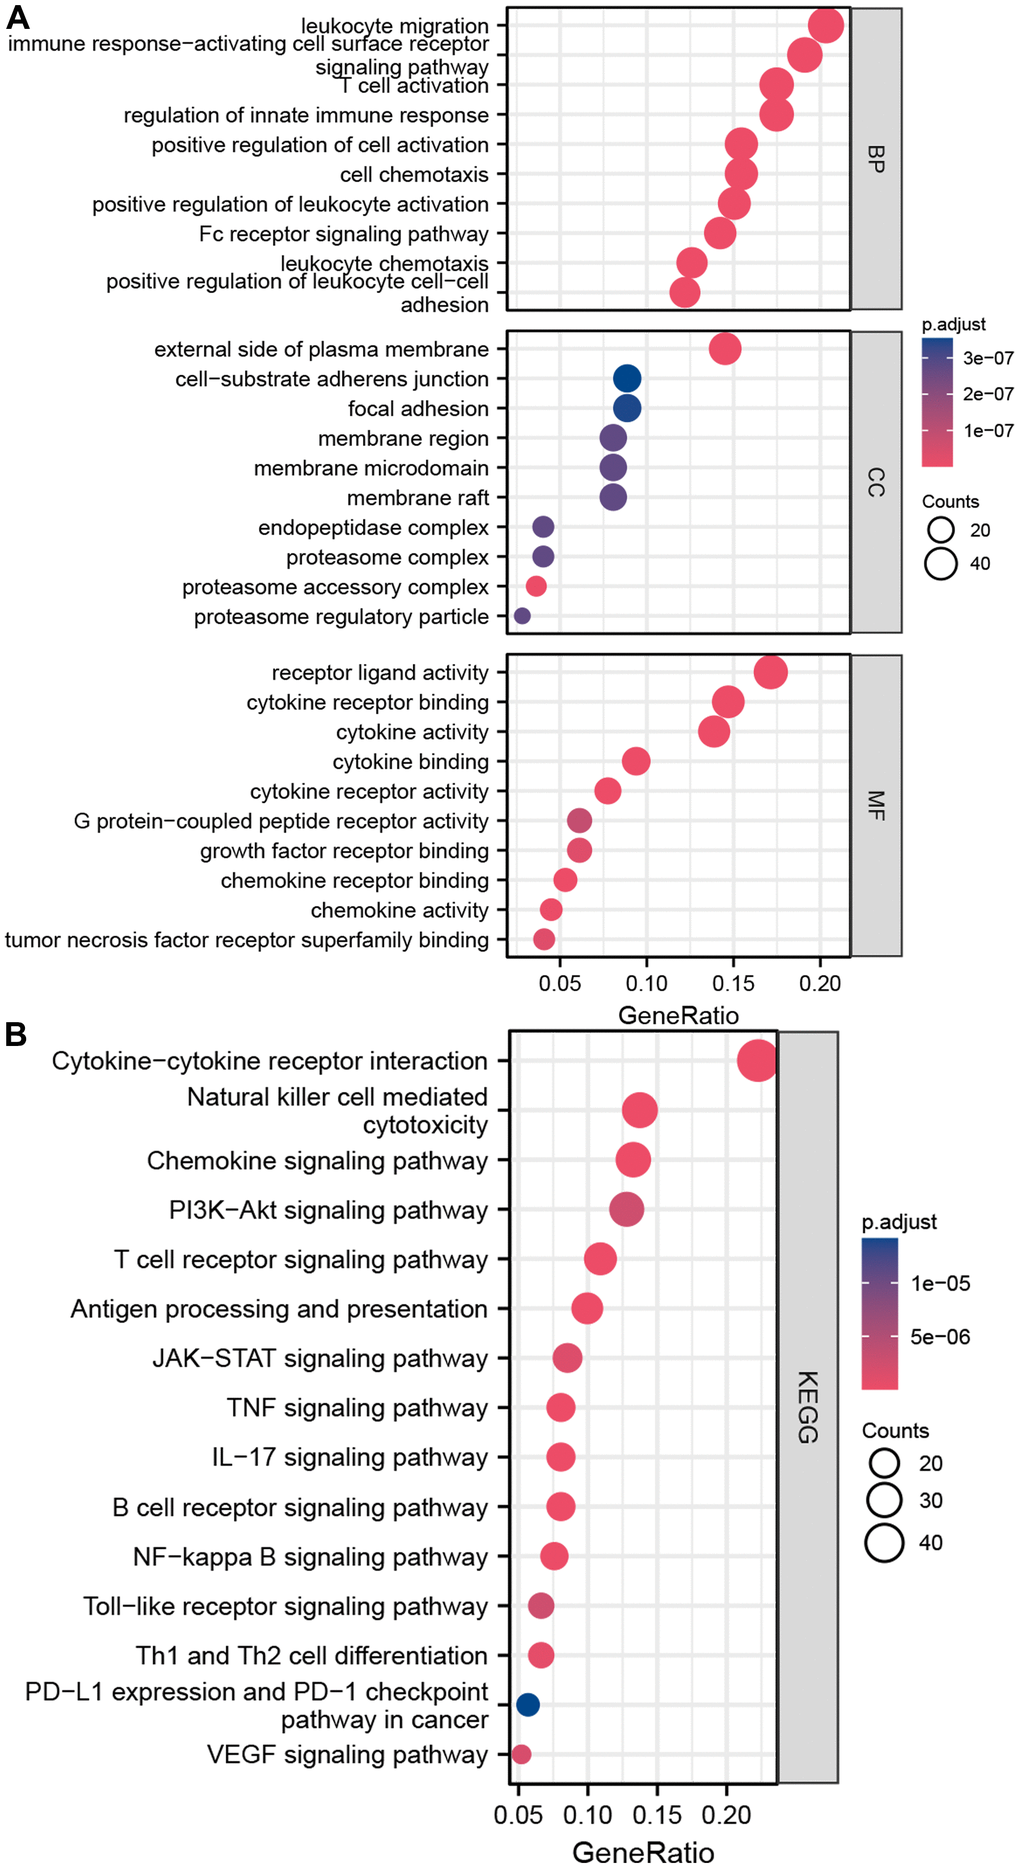 Enrichment analyses of differentially expressed CRIGs. (A) The results of GO analysis. (B) The results of KEGG analysis.